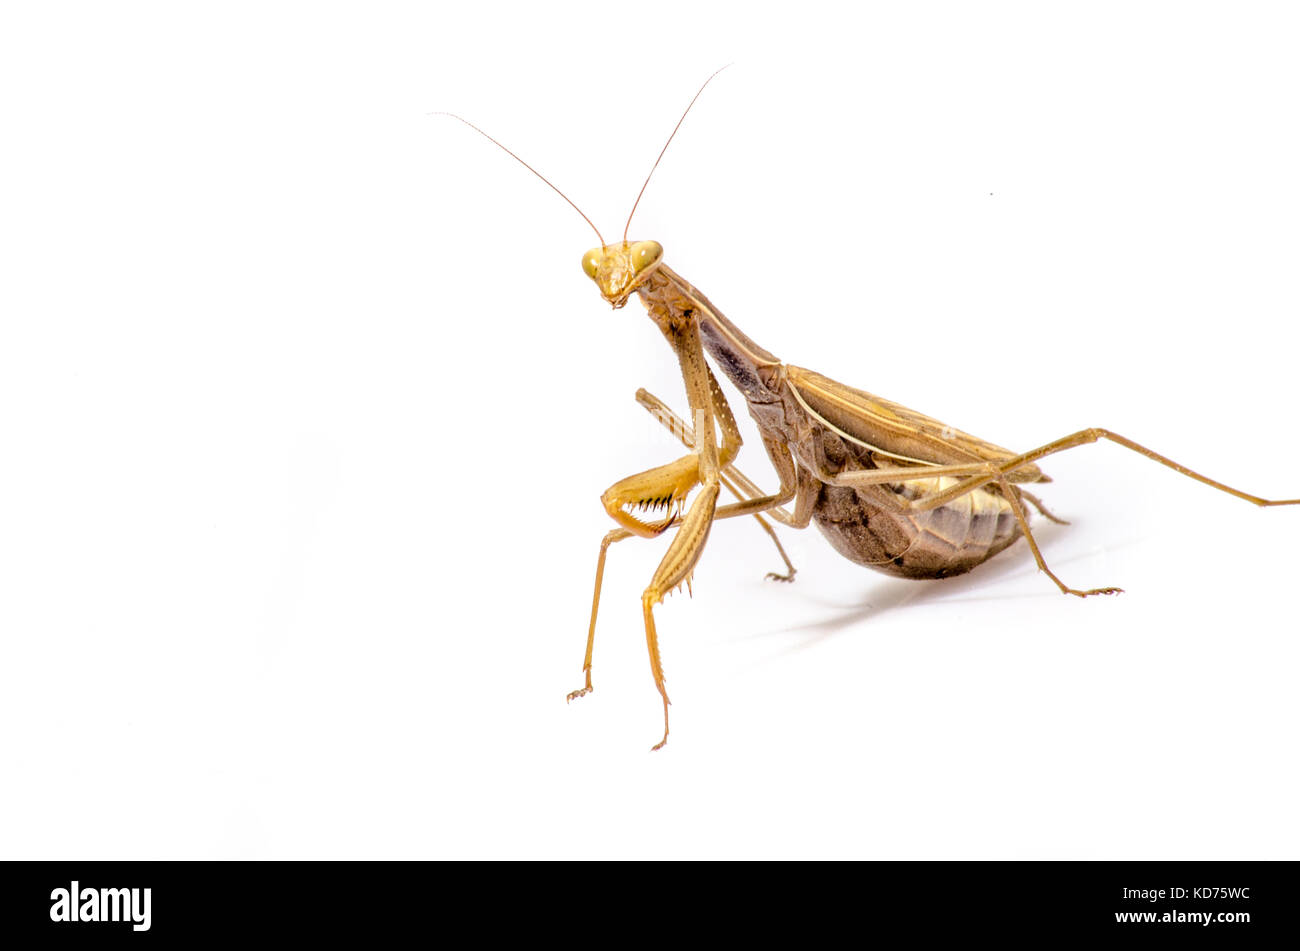 Violon errance, gongylus gongylodes mantis, in front of white background. Banque D'Images